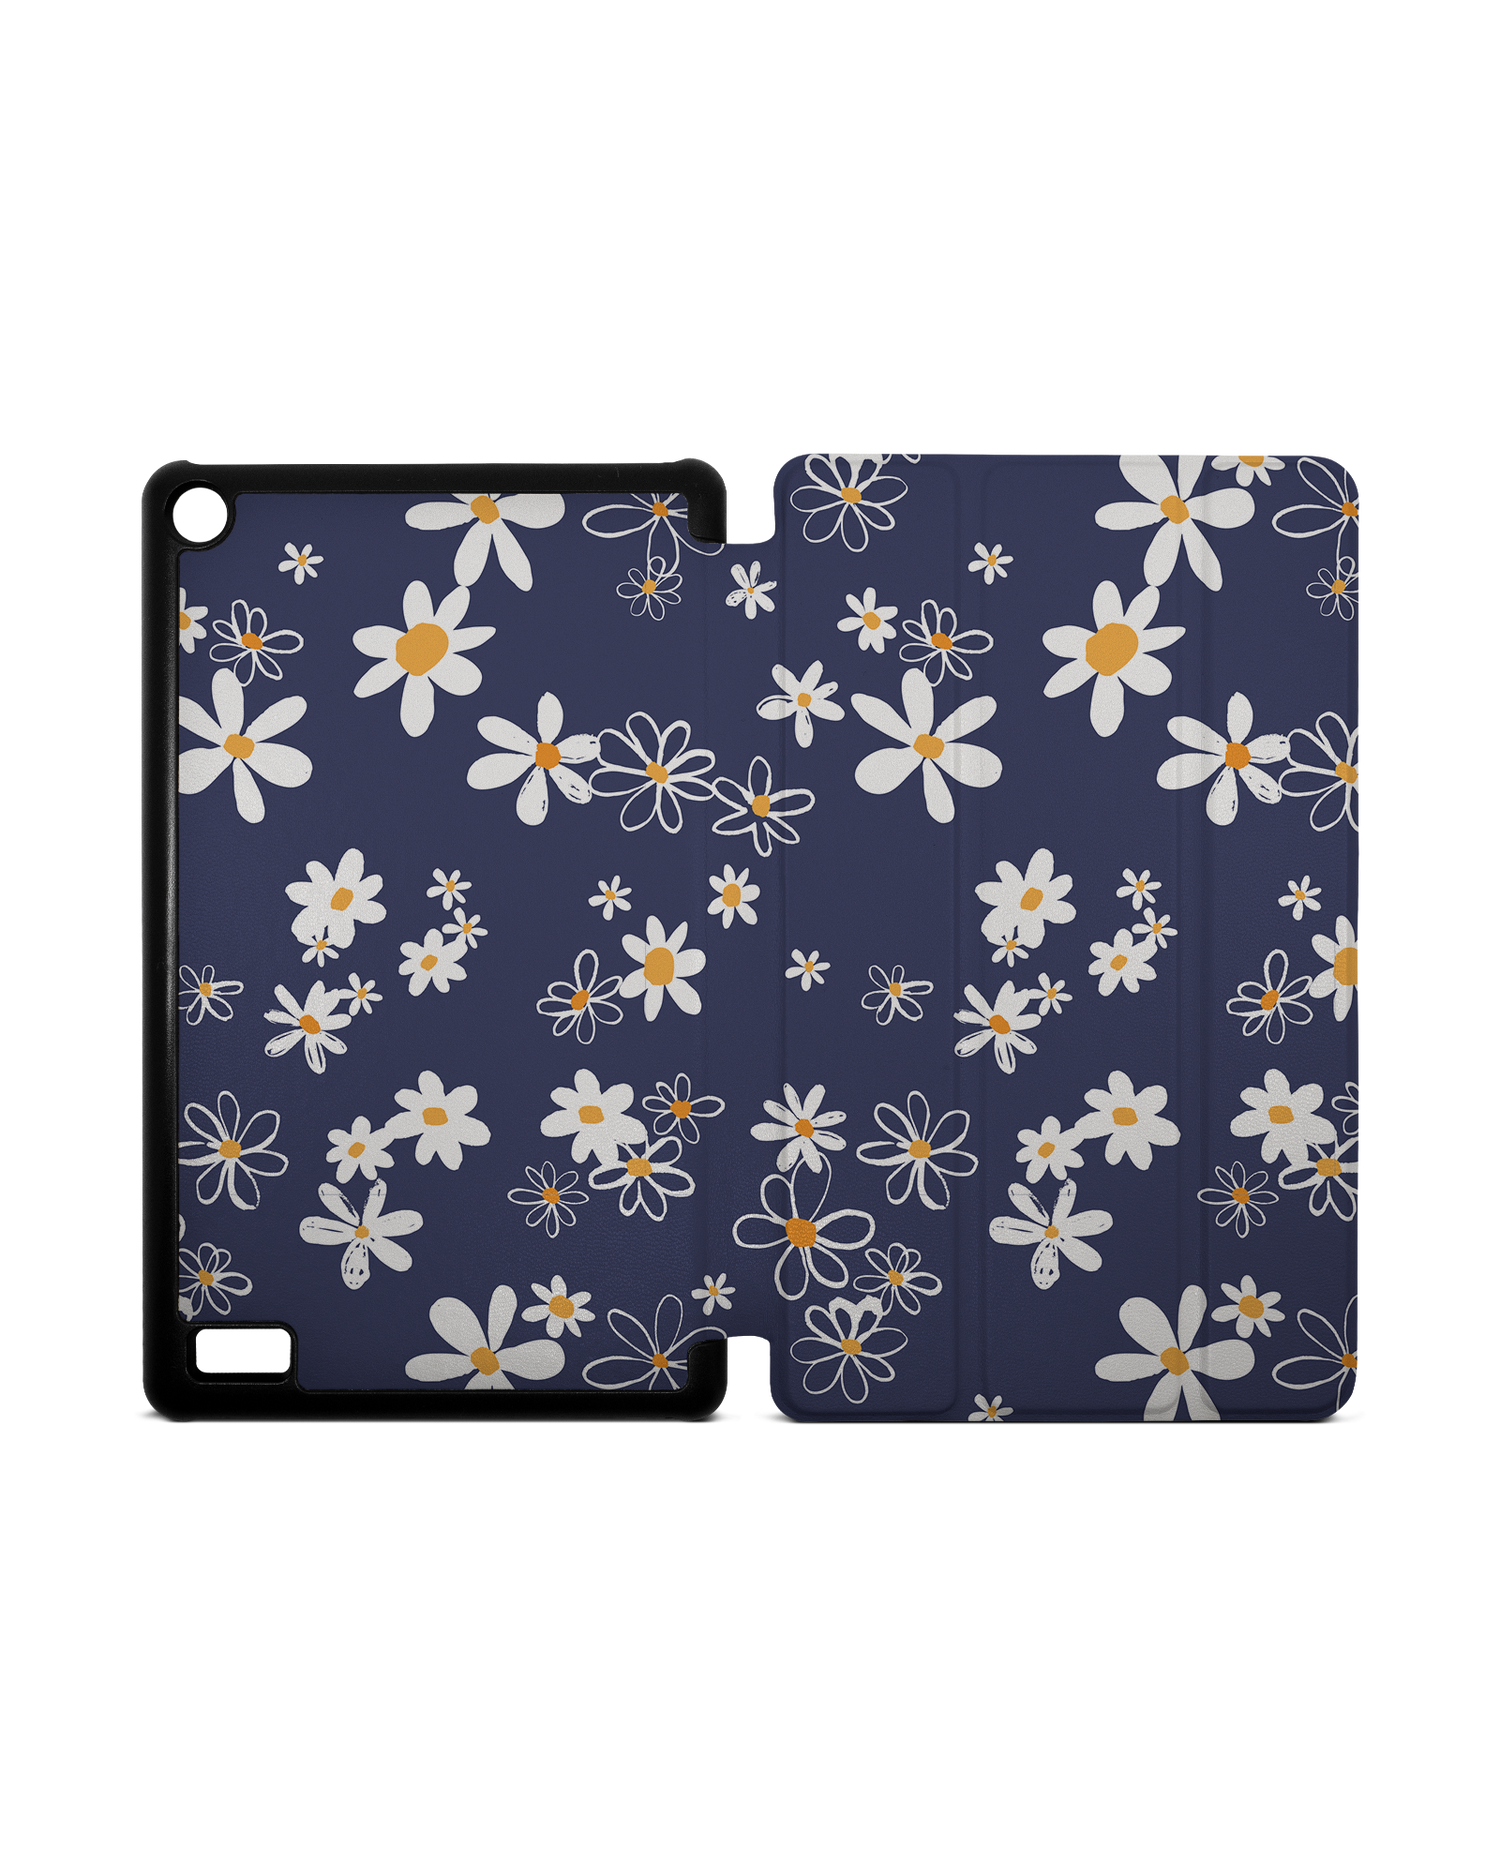 Navy Daisies Tablet Smart Case for Amazon Fire 7: Opened